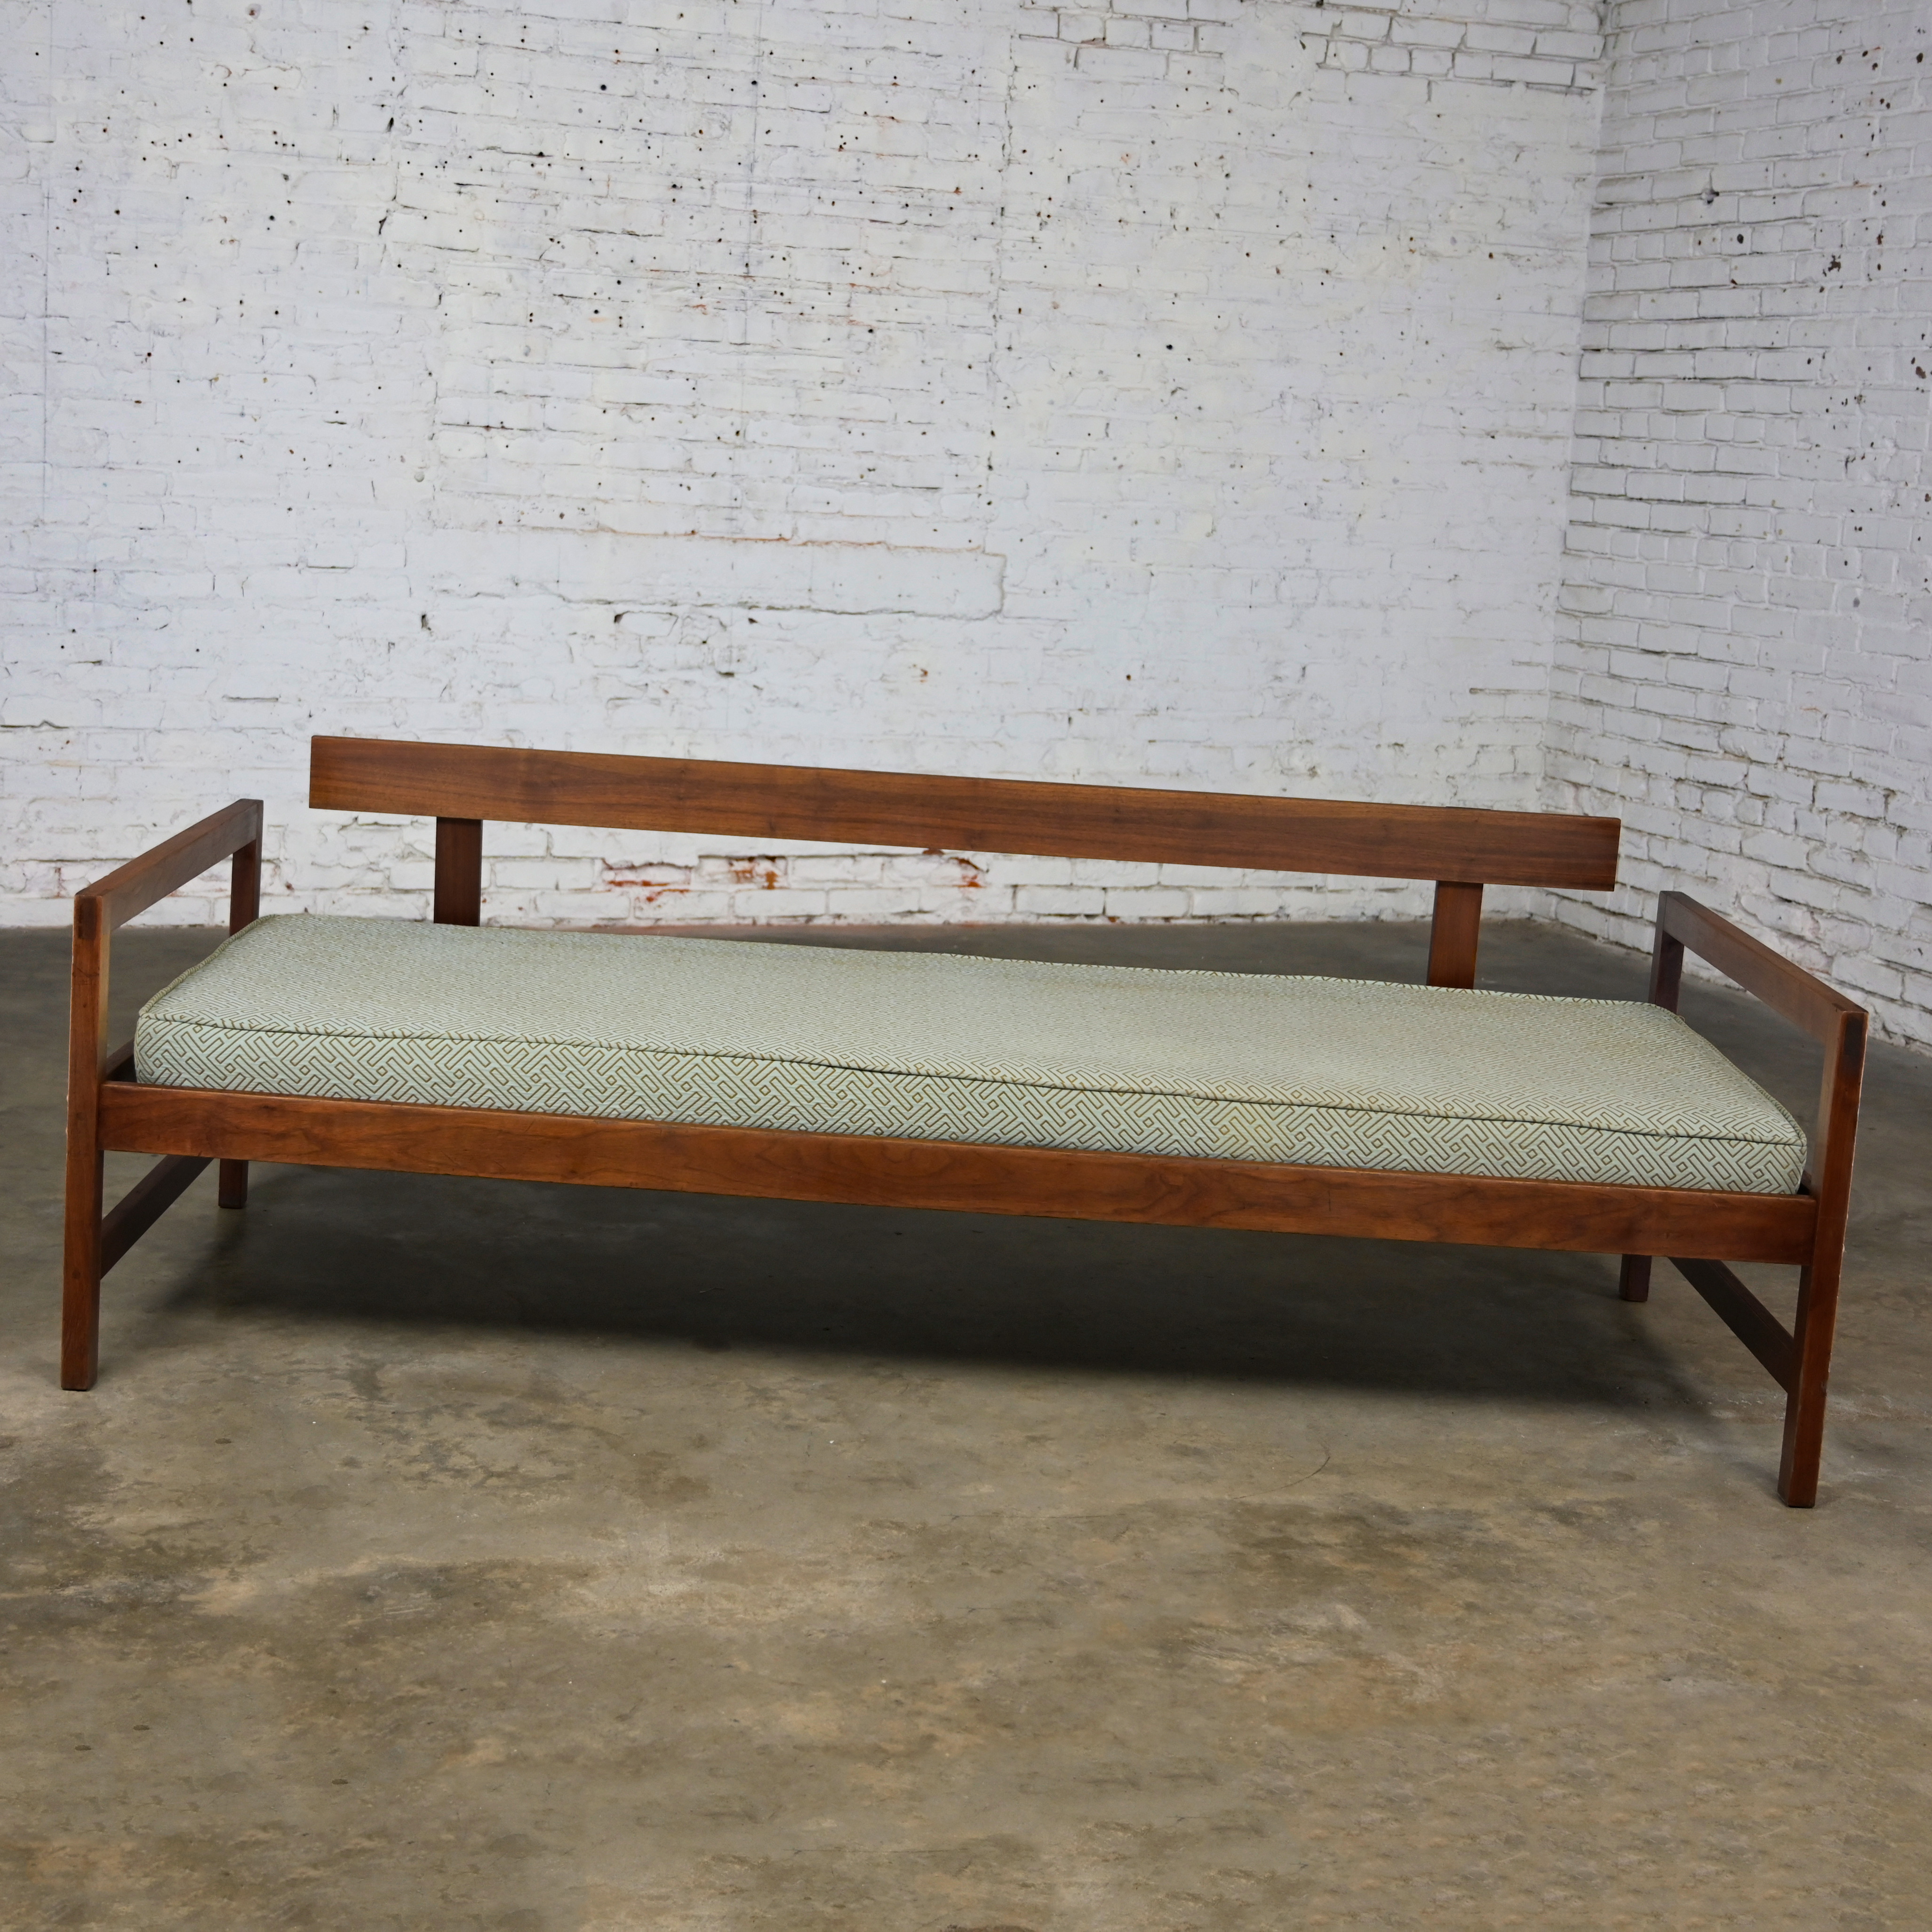 Mid-20th Century MCM Daybed Sofa Walnut Frame with Arms & Gray-Blue Upholstery & Stram Springs